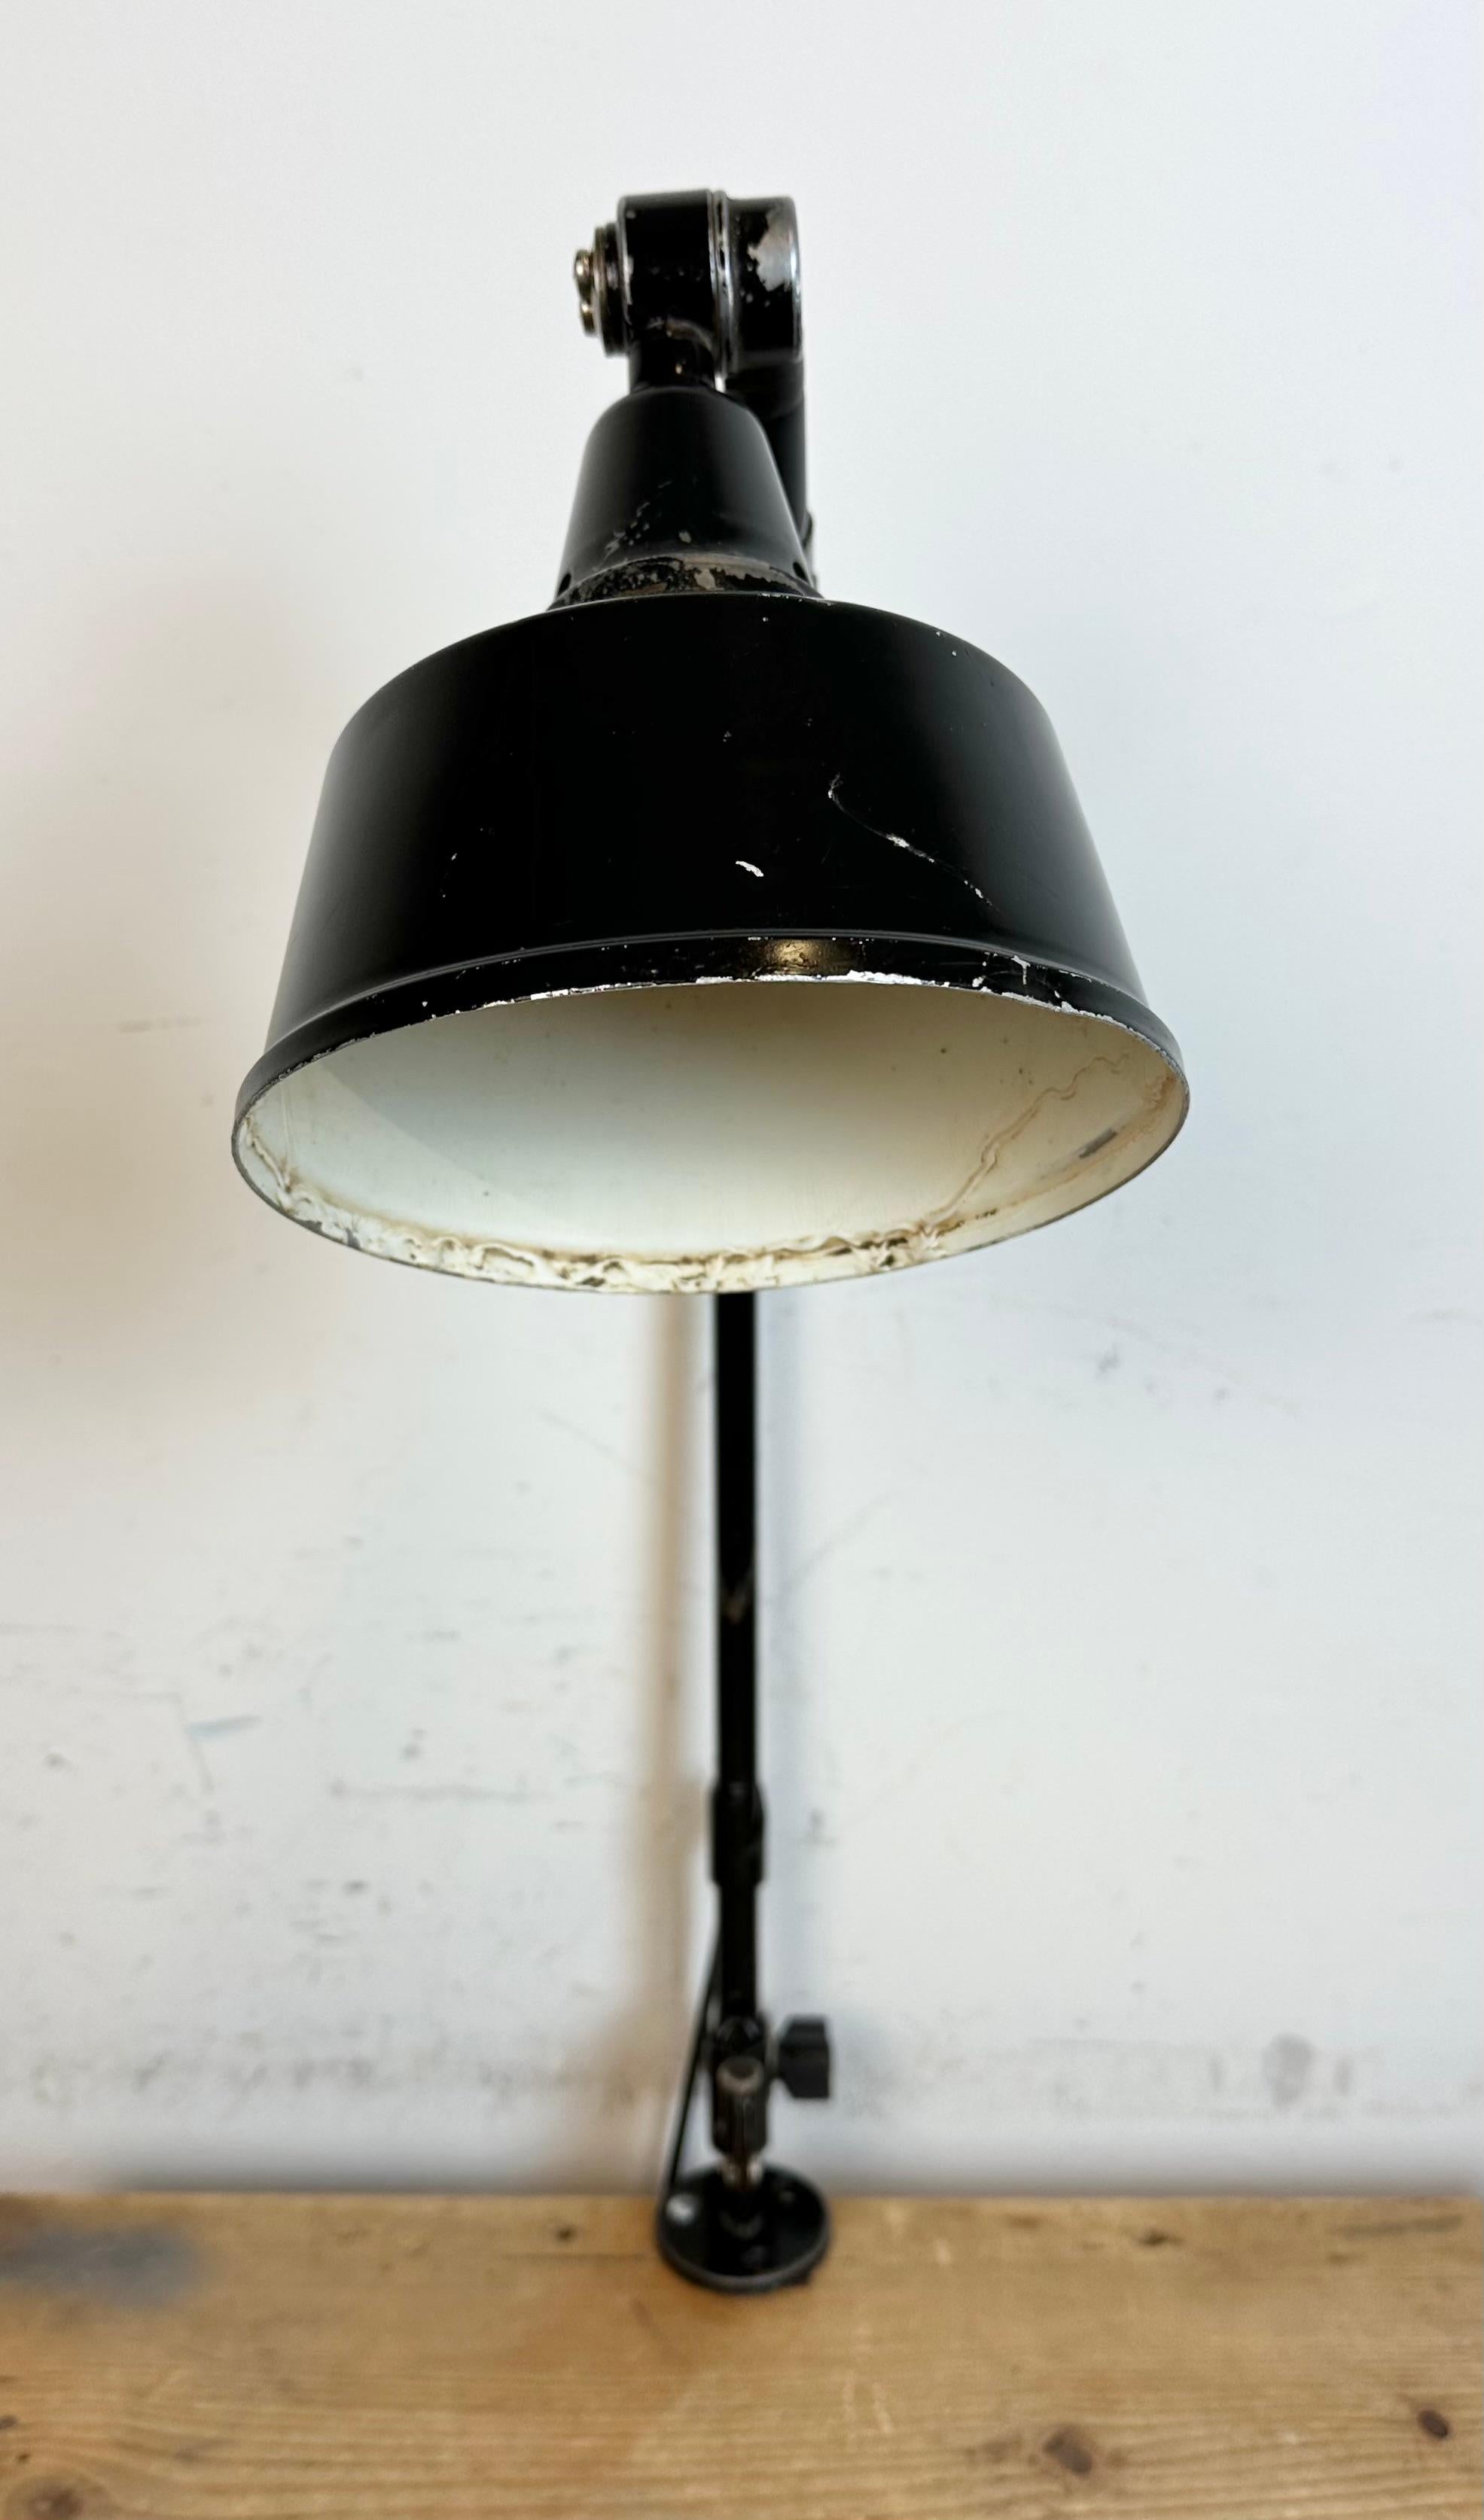 Industrial DDRP Desk or Wall Lamp by Curt Fischer for Midgard, 1930s For Sale 10